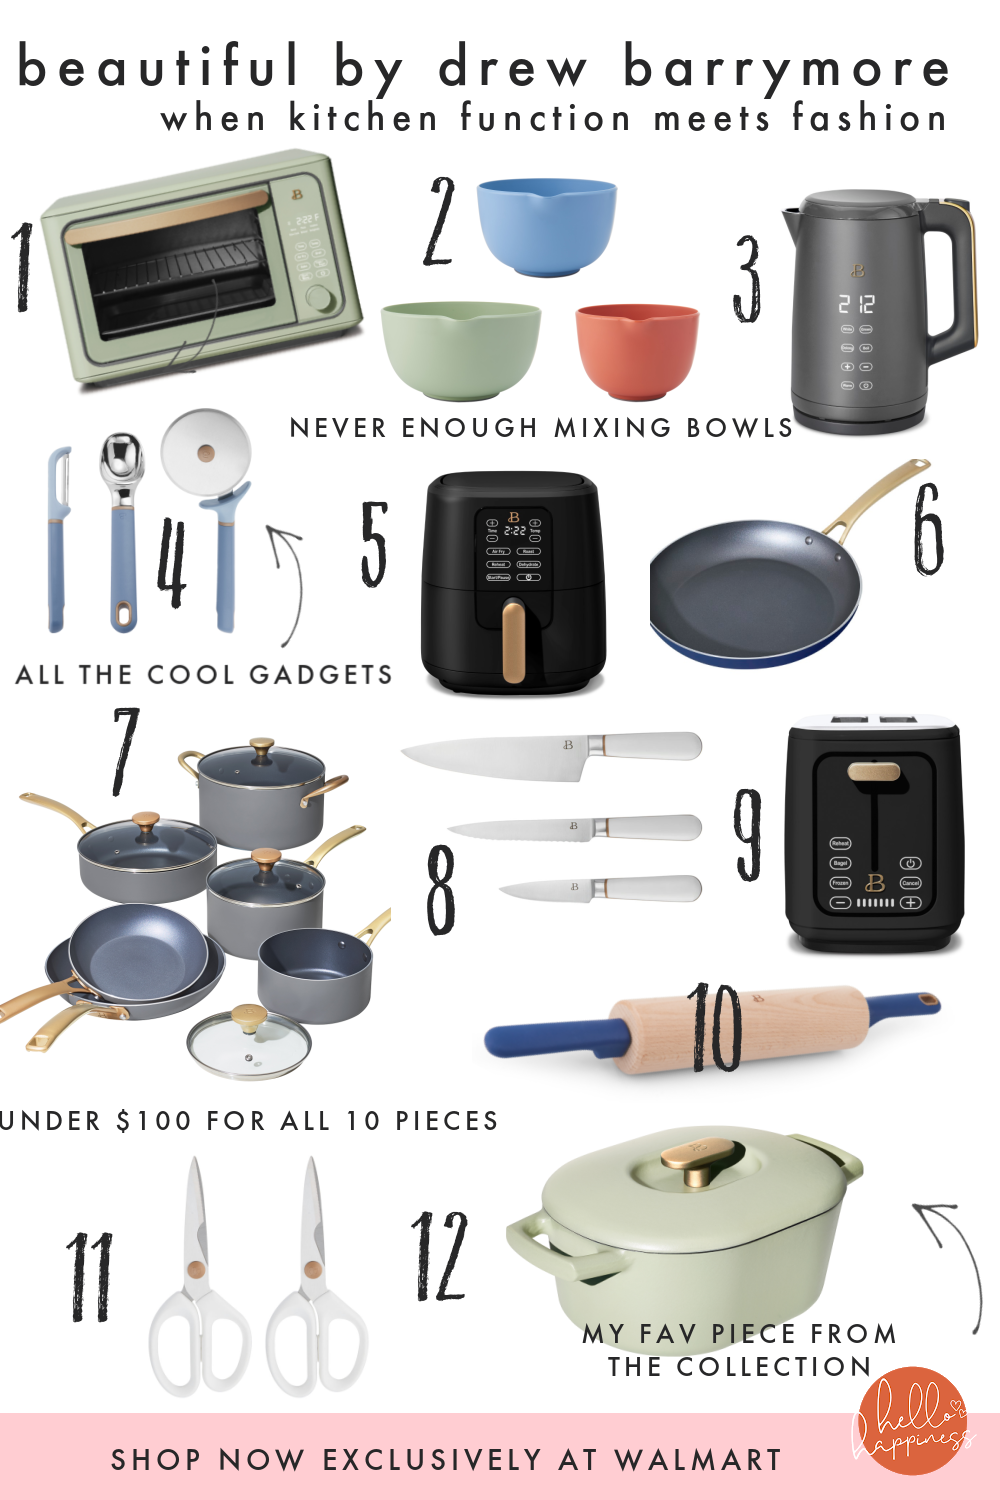 Beautiful by Drew Barrymore by popular Nashville life and style blog, Hello Happiness: collage image of Beautiful by Drew Barrymore pots, scissors, toaster, rolling pin, knives, toaster, bowls, and toaster oven. 